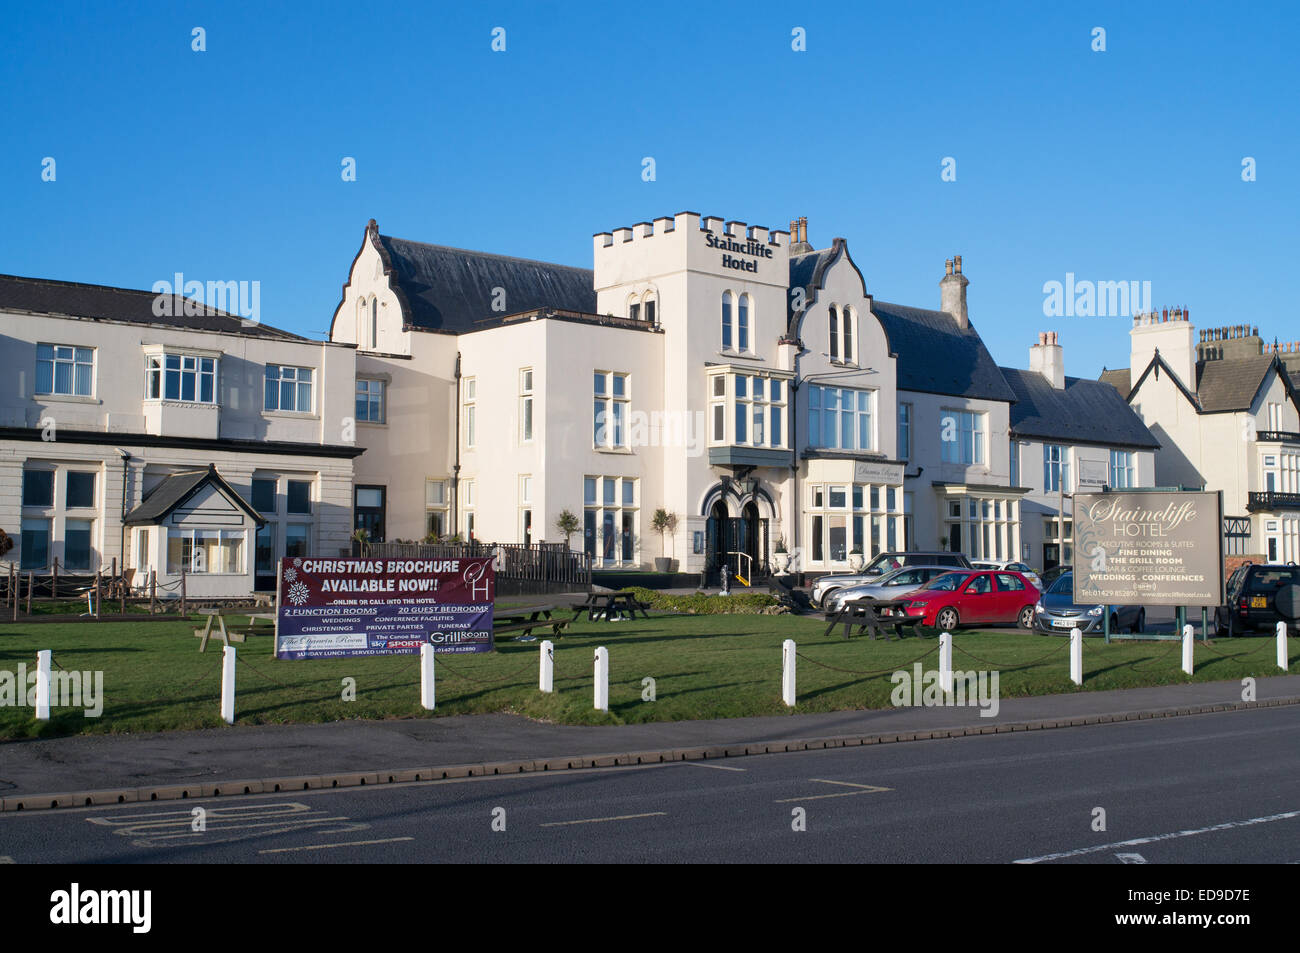 the staincliffe hotel on the seafront at seaton carew hartlepool north ED9D7E